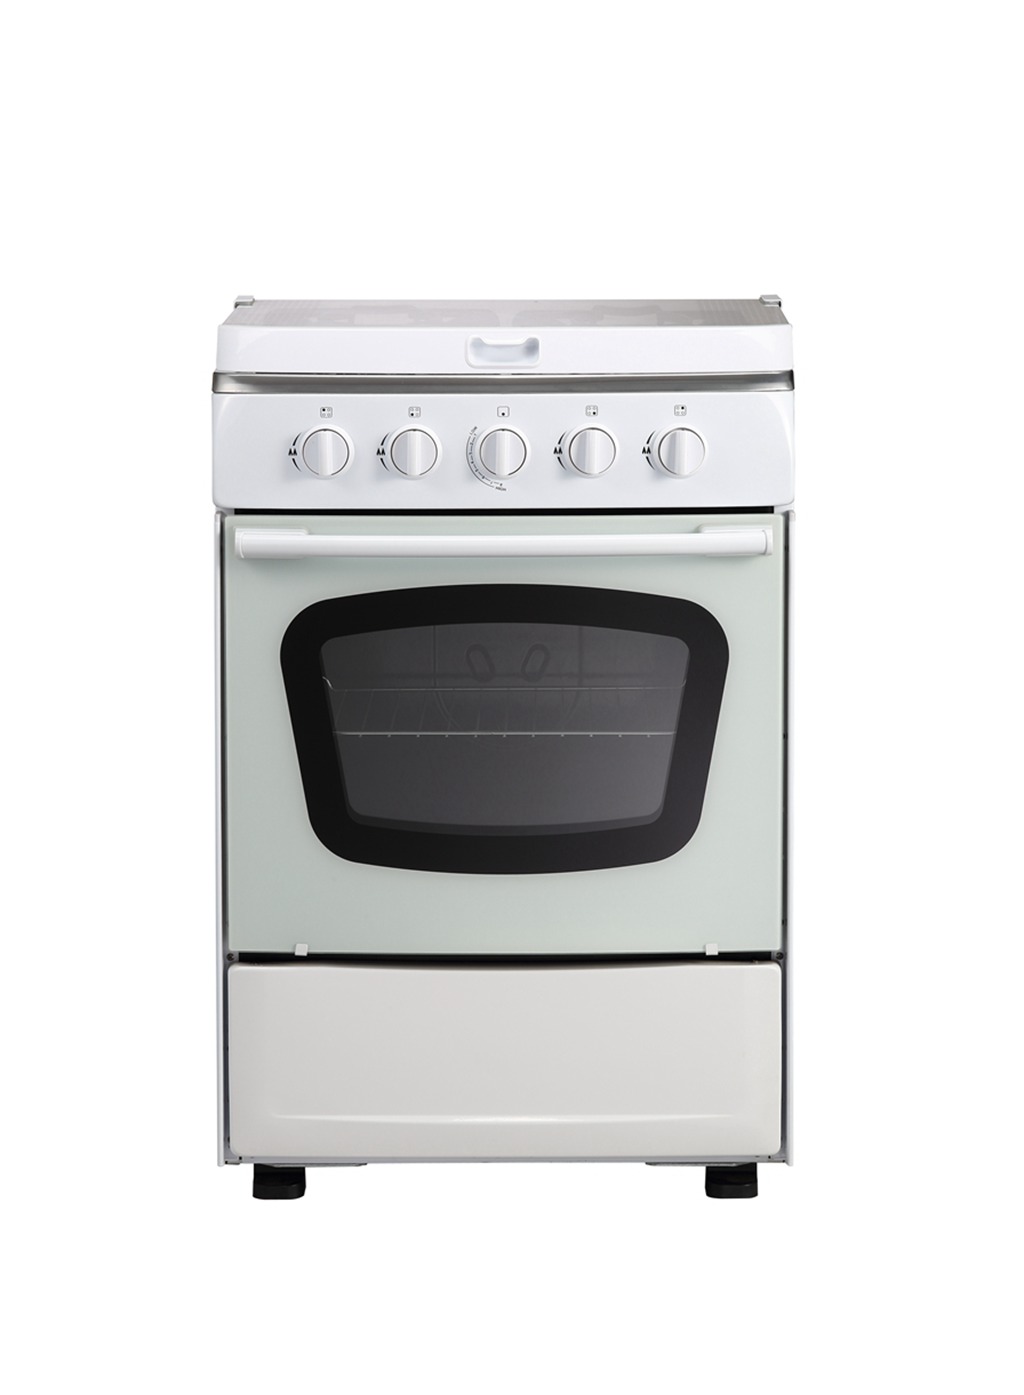 24 Inches Wide 4 Burner Gas Stove with Oven